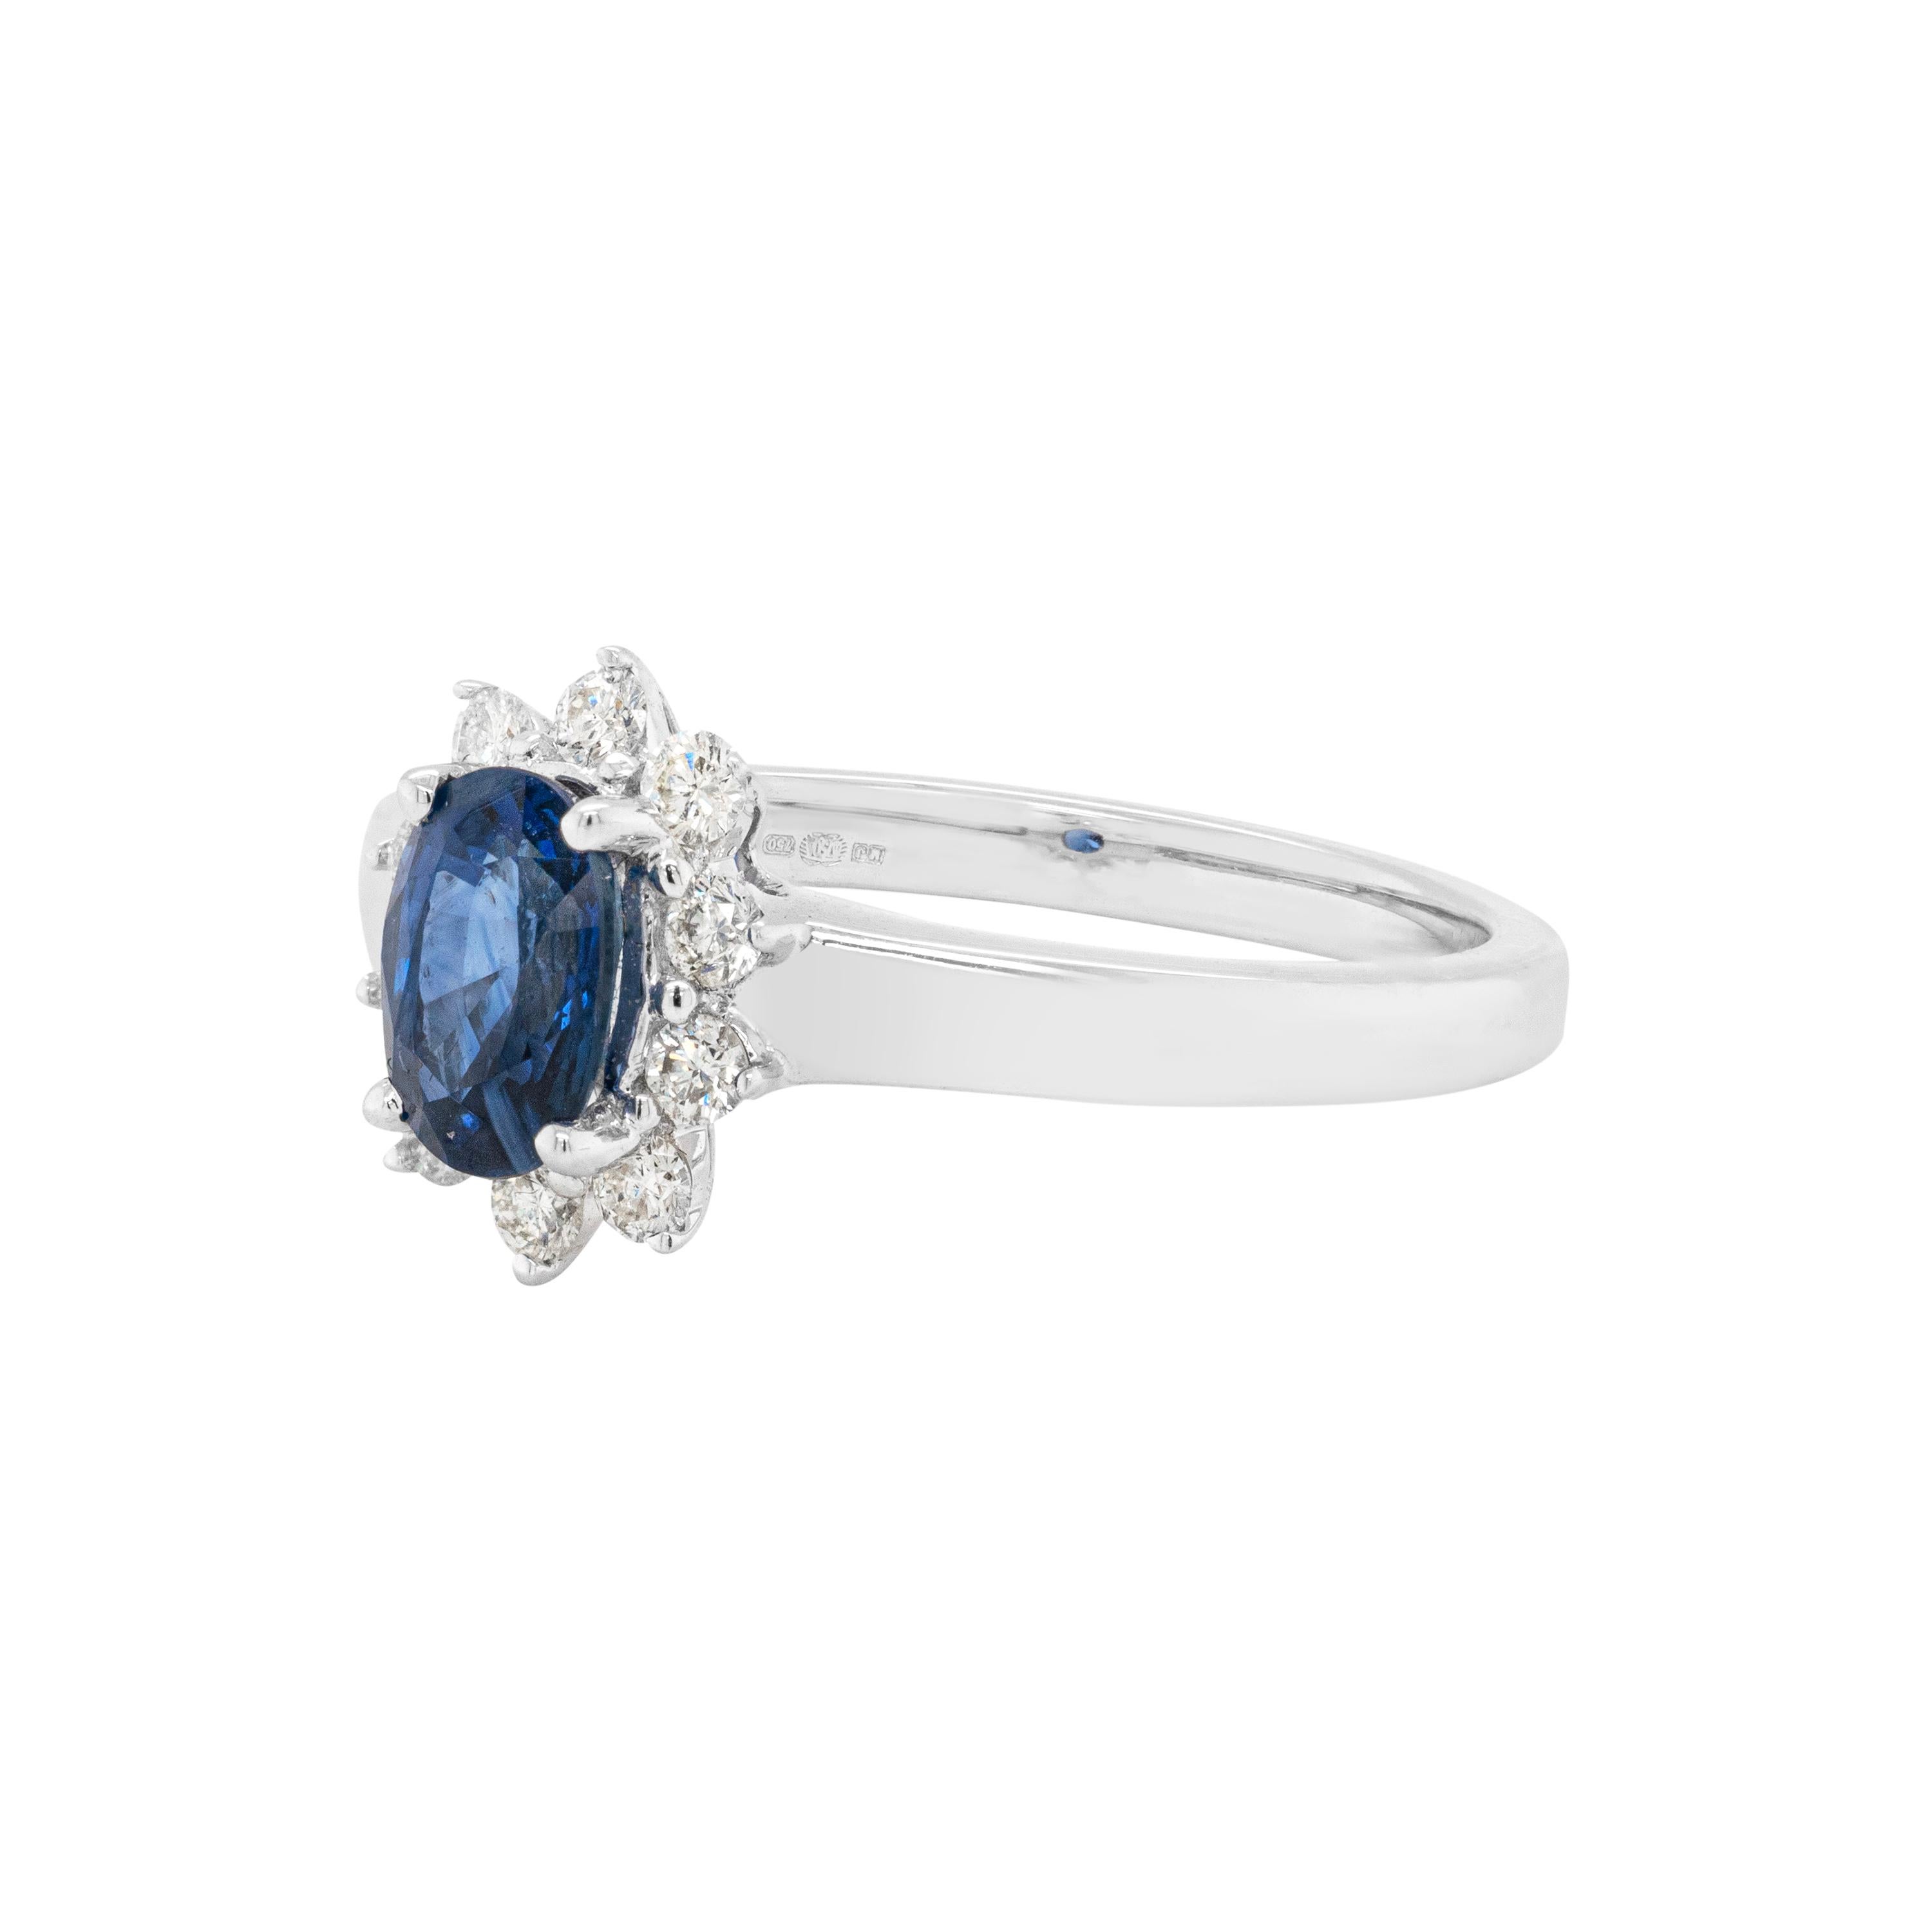 This lovely cluster engagement ring is beautifully centred with a royal blue oval sapphire weighing approximately 1.00 carats, mounted in a four claw, open back setting. The vivid stone is surrounded by 10 fine quality round brilliant cut diamonds